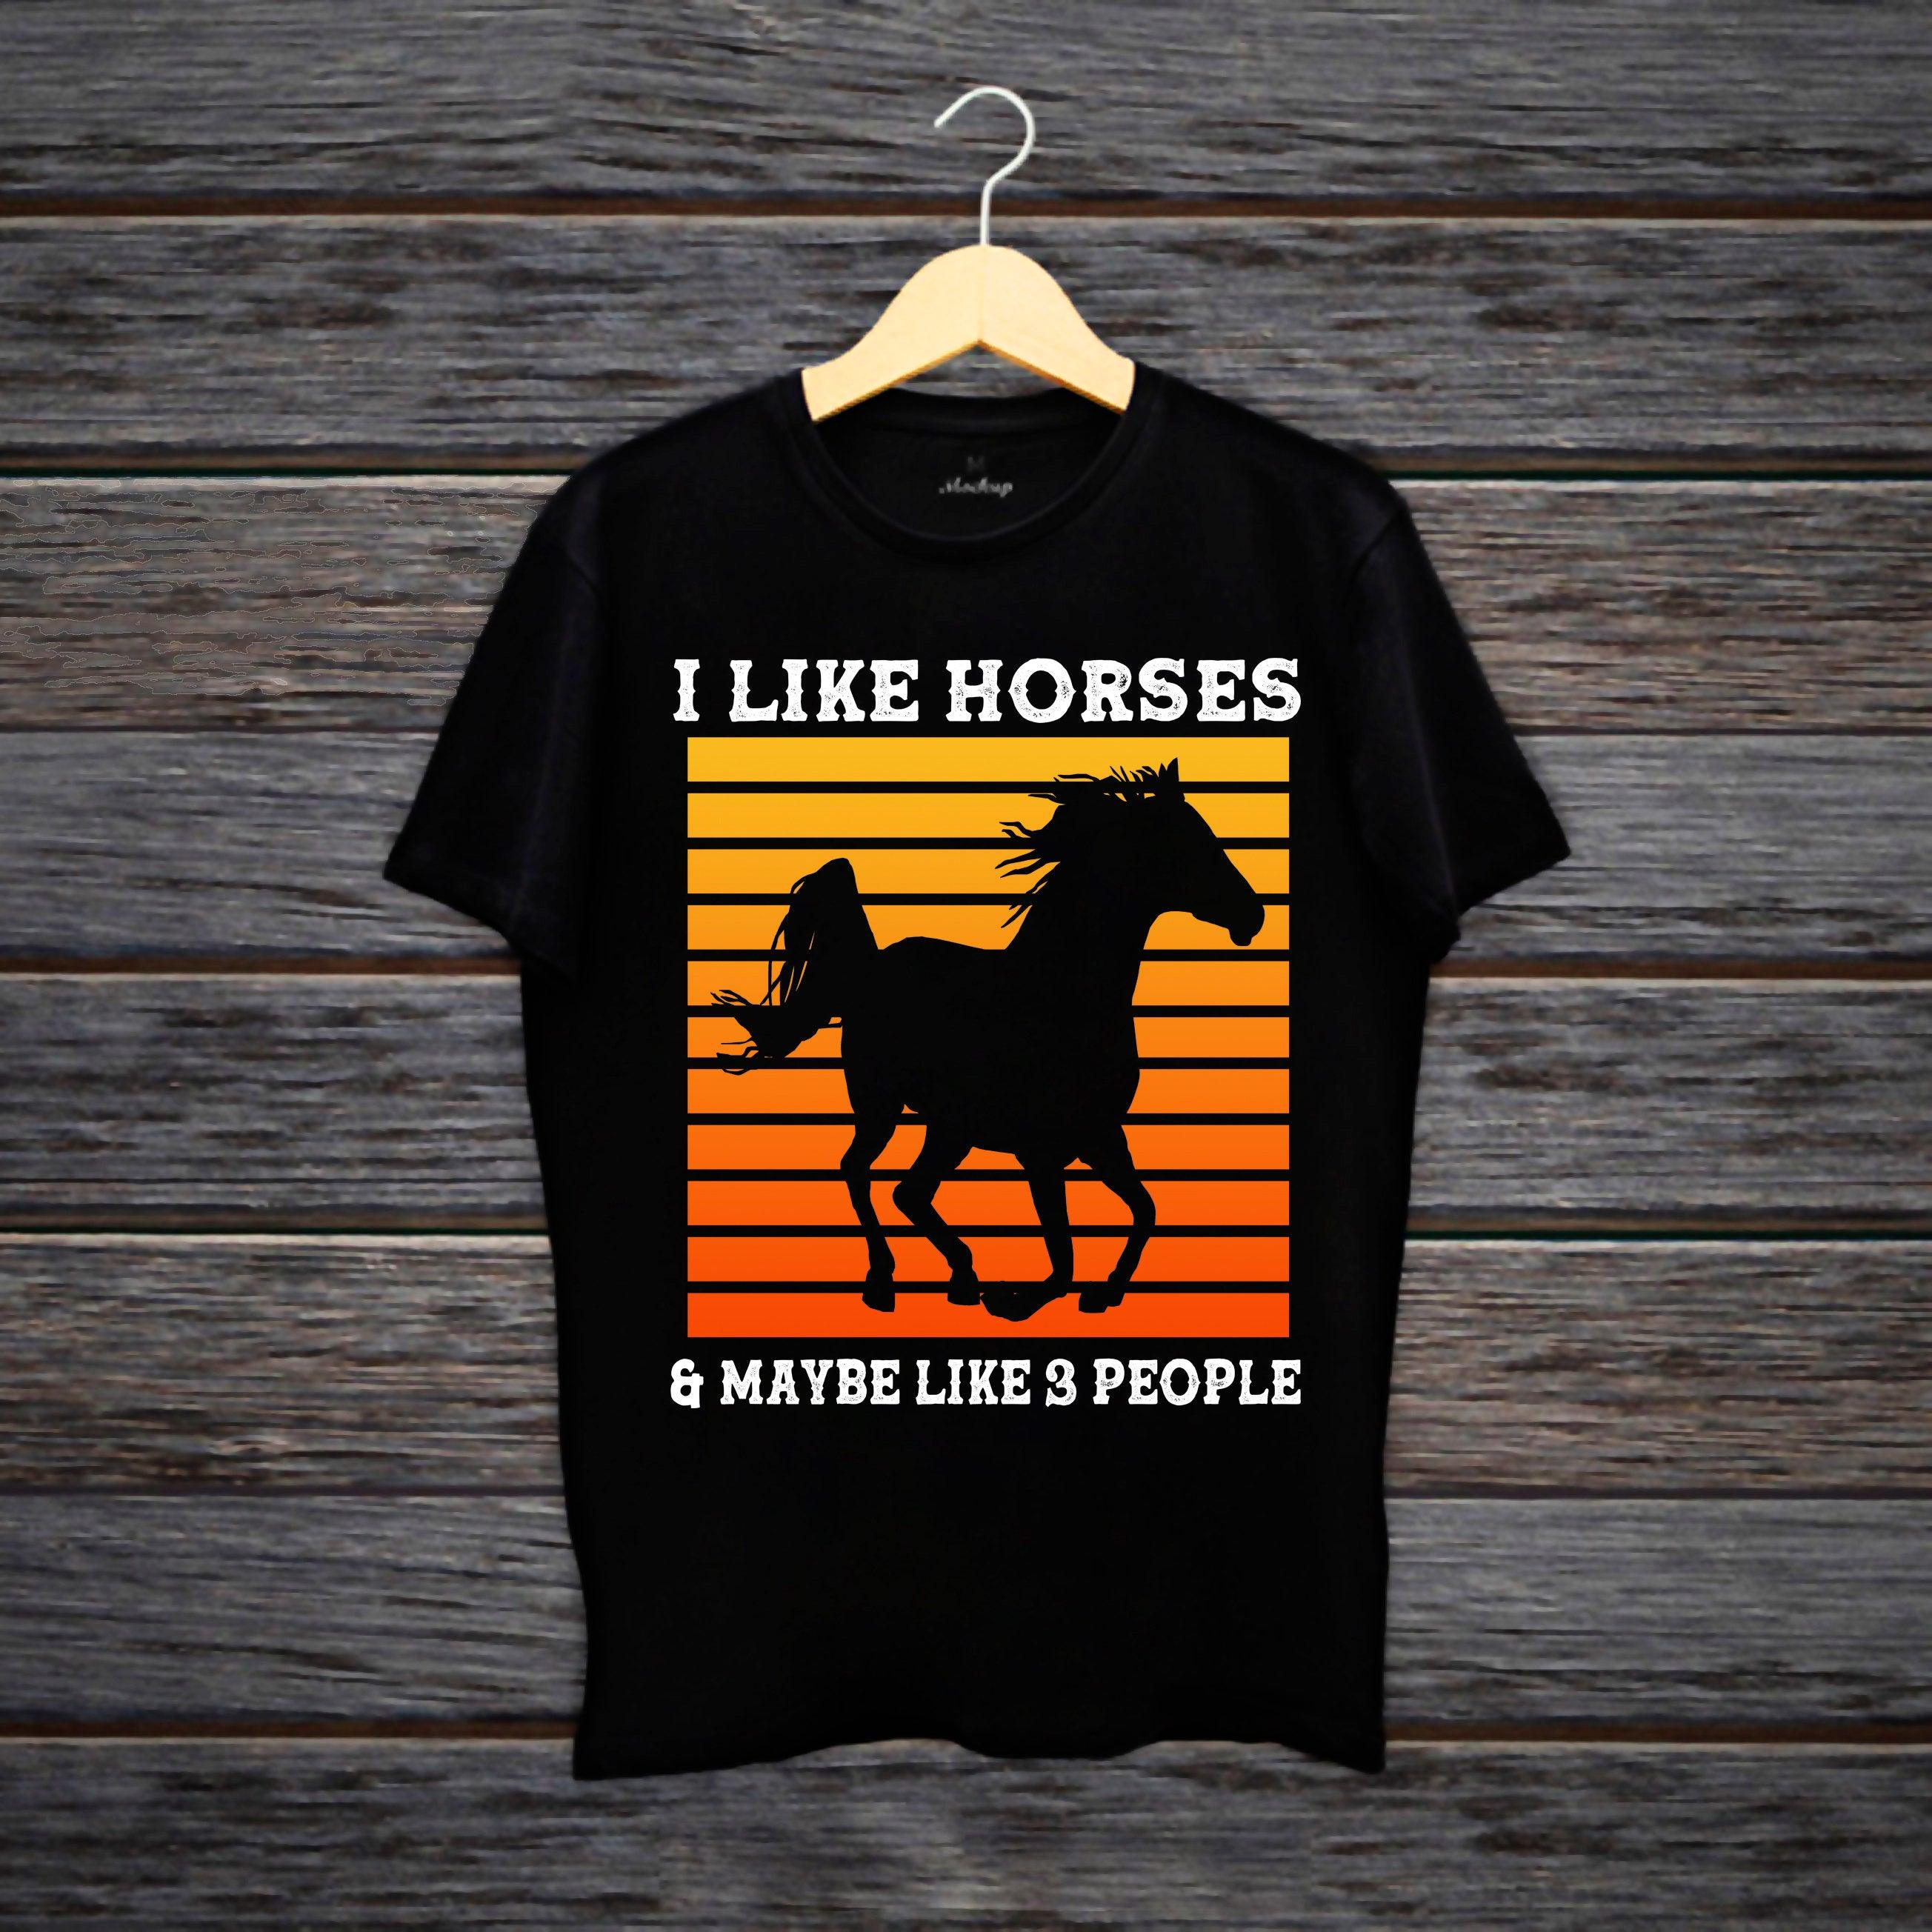 I Like Horses Dogs And Maybe 3 People Shirt, Horse Lover Shirt, Girls Horse Shirt,Gift For Horse Owner,Farmer Shirt,Horse Gift,Horse T Shirt Farmer Shirt, Farmer Tee, Gift For Horse Owner, Girls Horse, Girls Horse Shirt, Horse Gift, Horse Lover Shirt, Horse T Shirt, I Like Horses, retro gift, Retro horrse gift, vintage gift, Vintage Horse shirt - plusminusco.com